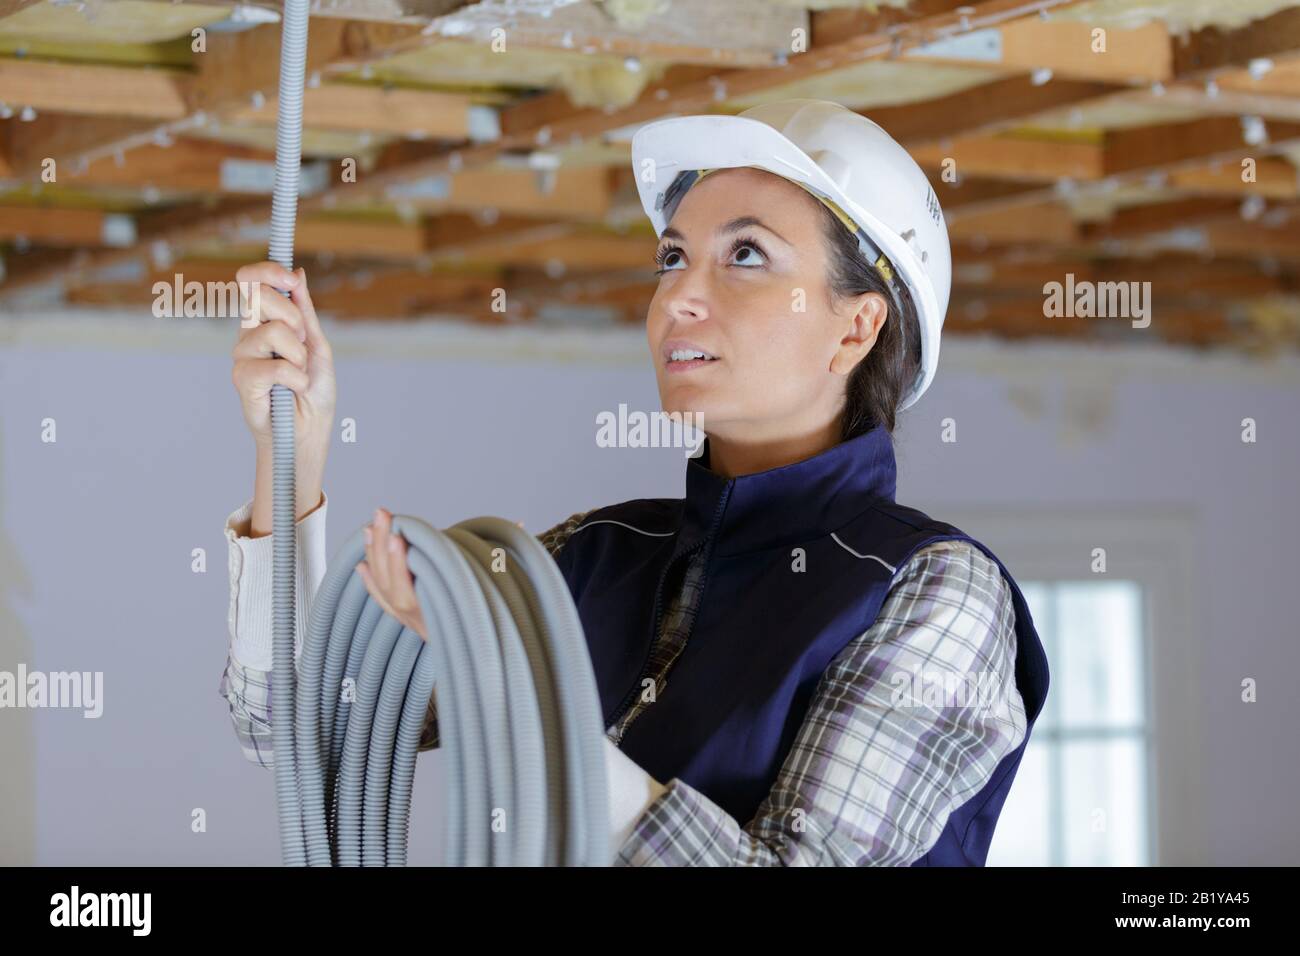 female electrician installing ventilation in ceiling Stock Photo